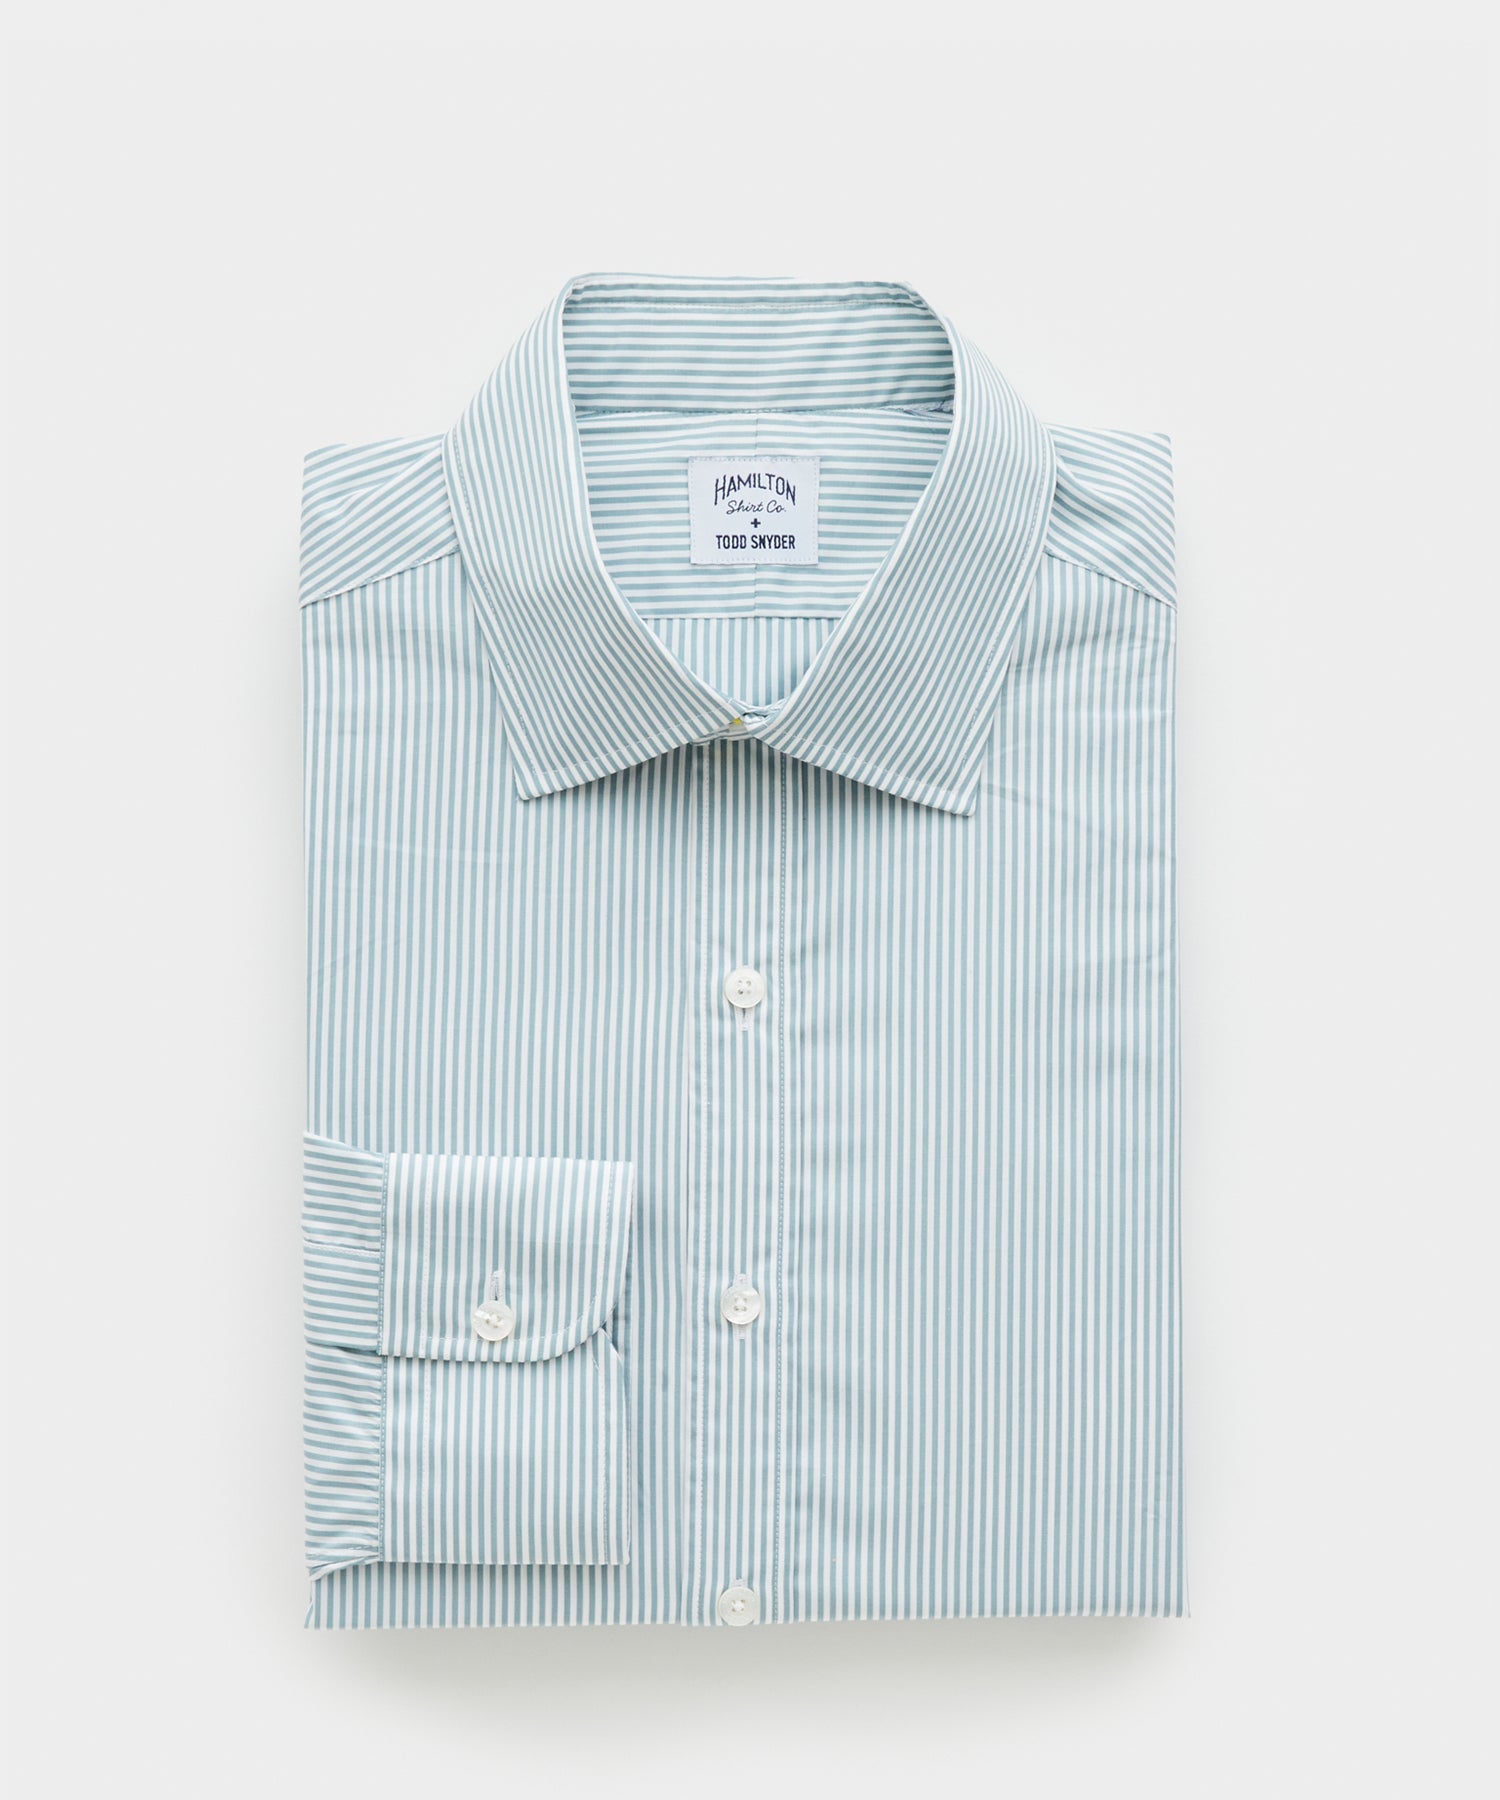 Made in the USA Hamilton + Todd Snyder Dress Shirt in Micro Banker Stripe